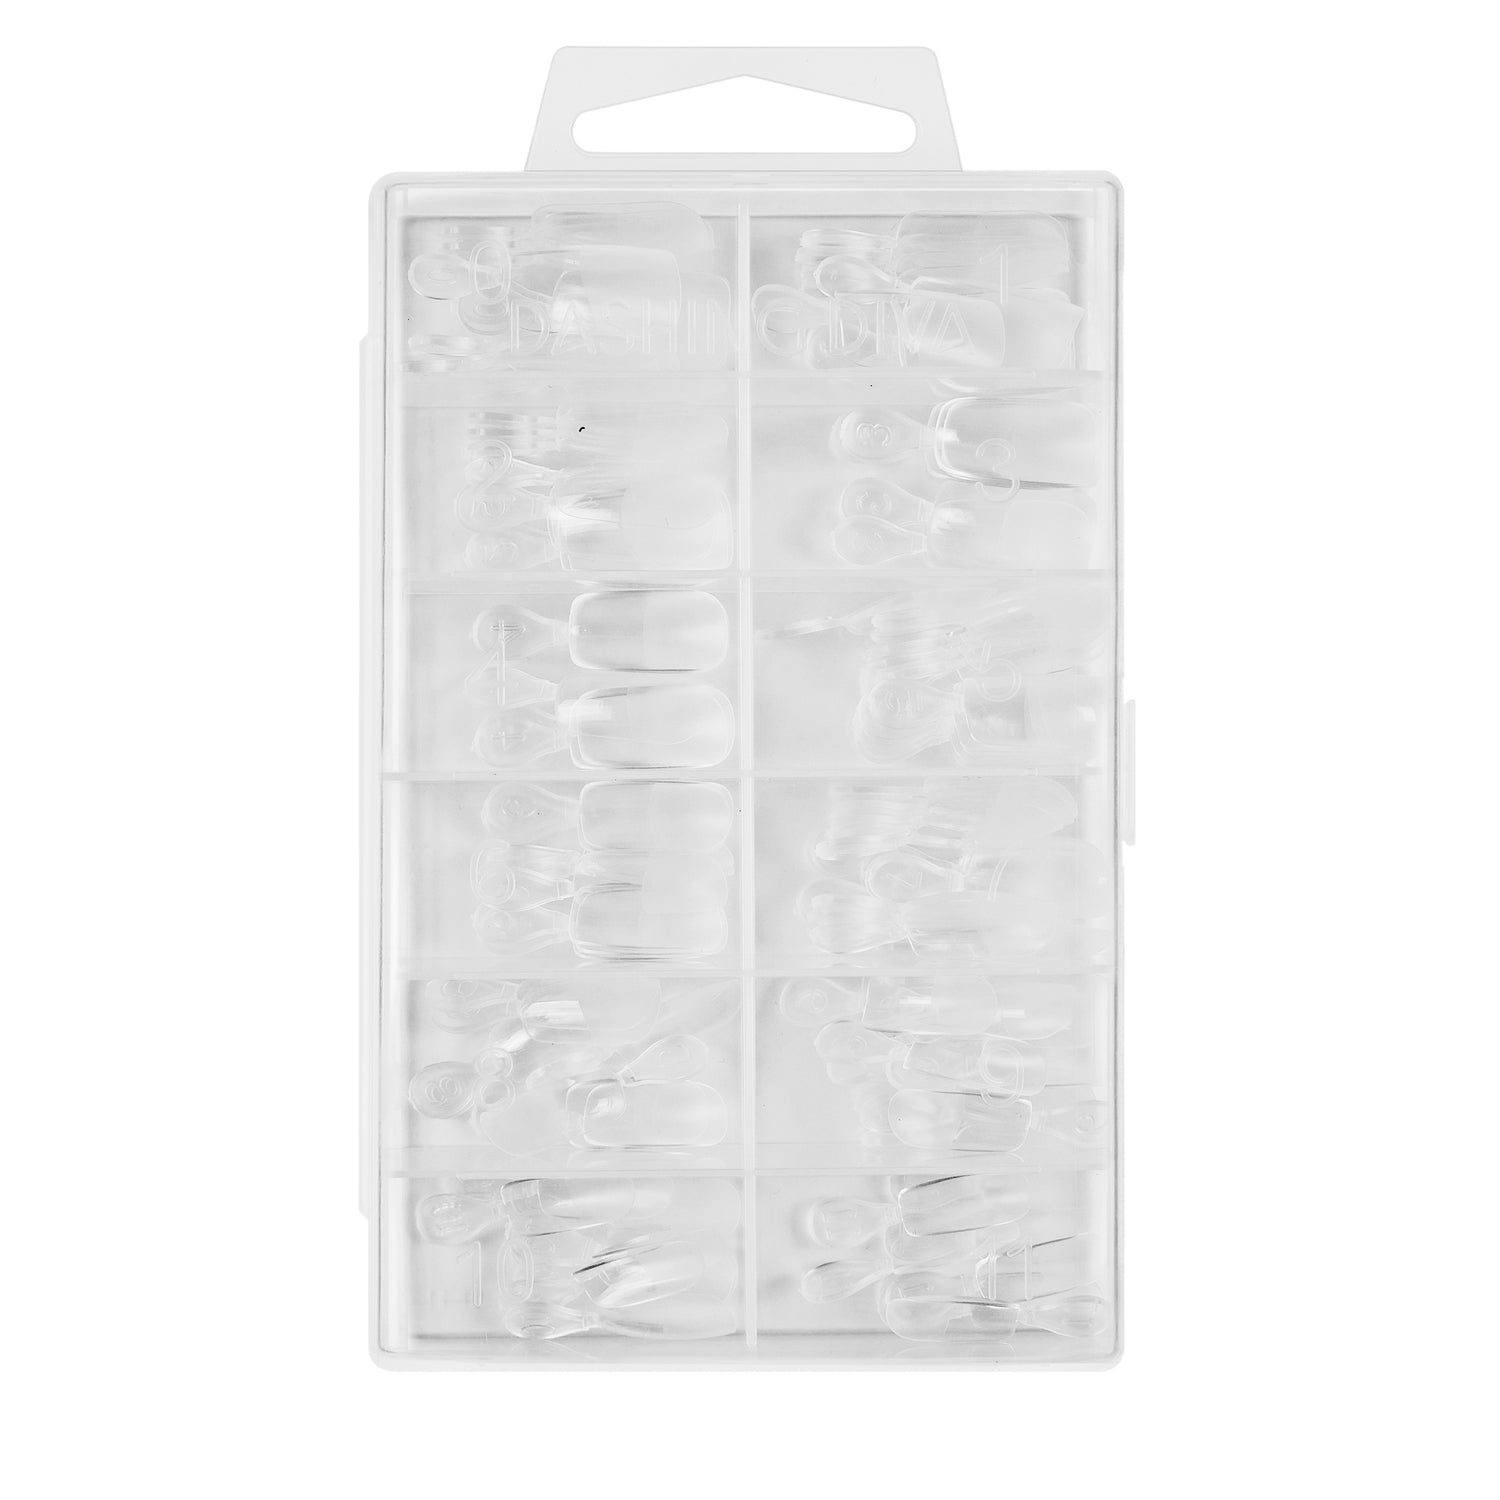 GelXtend Nail Tips - Clear, Medium Square